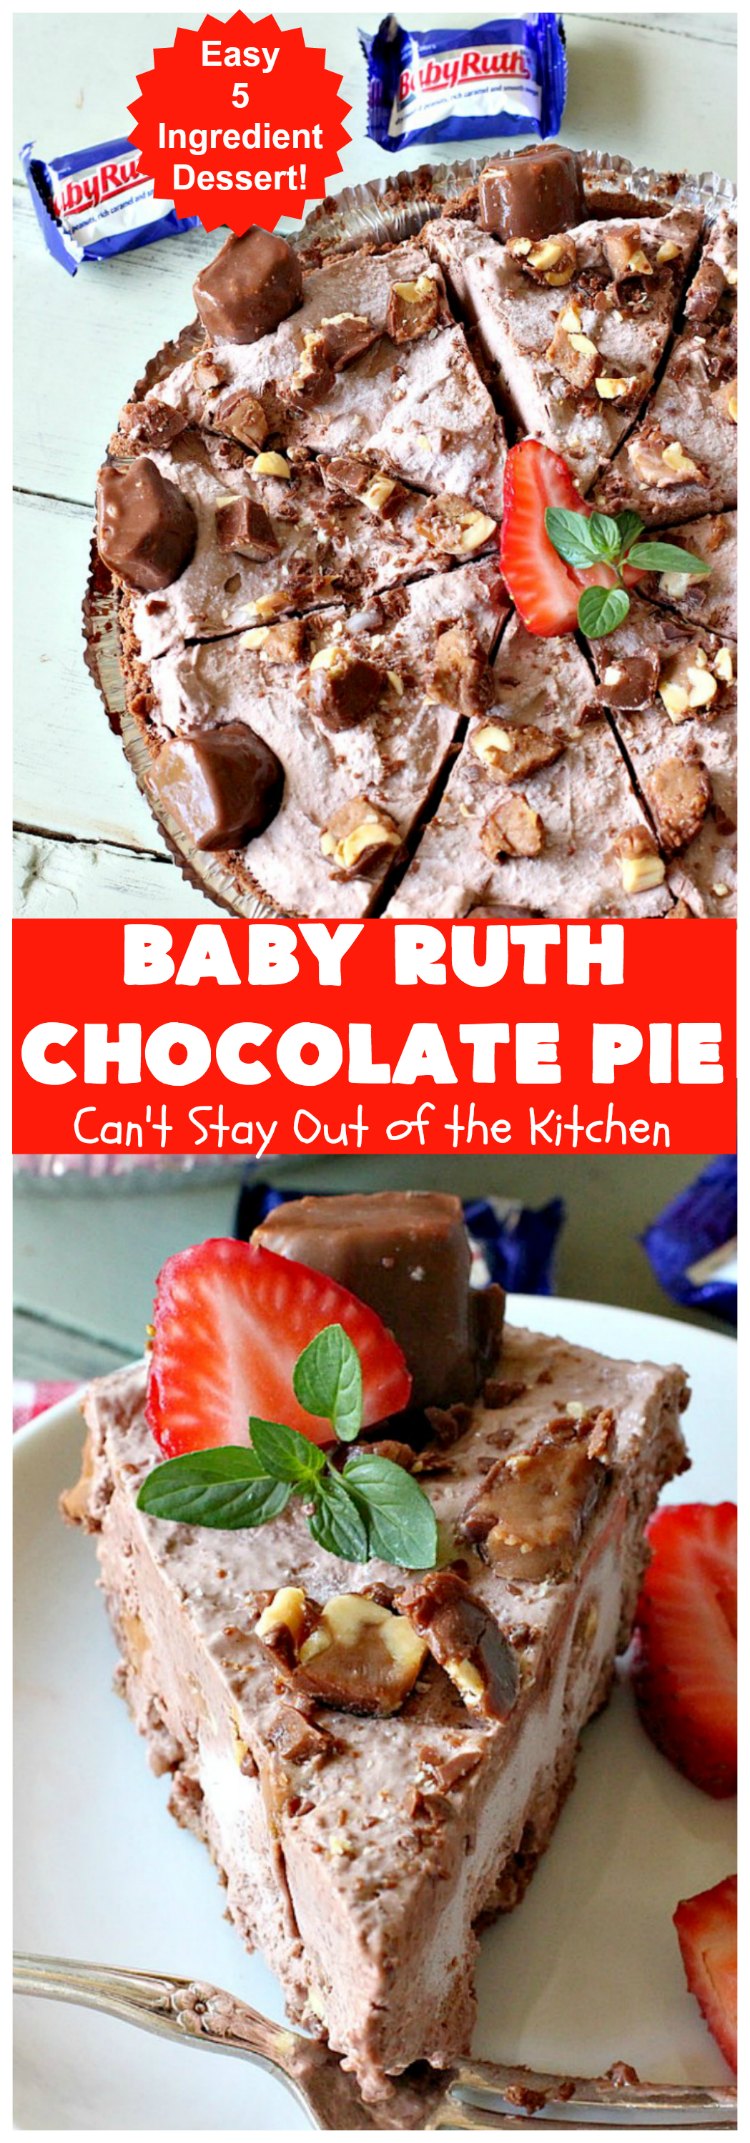 Baby Ruth Chocolate Pie | Can't Stay Out of the Kitchen